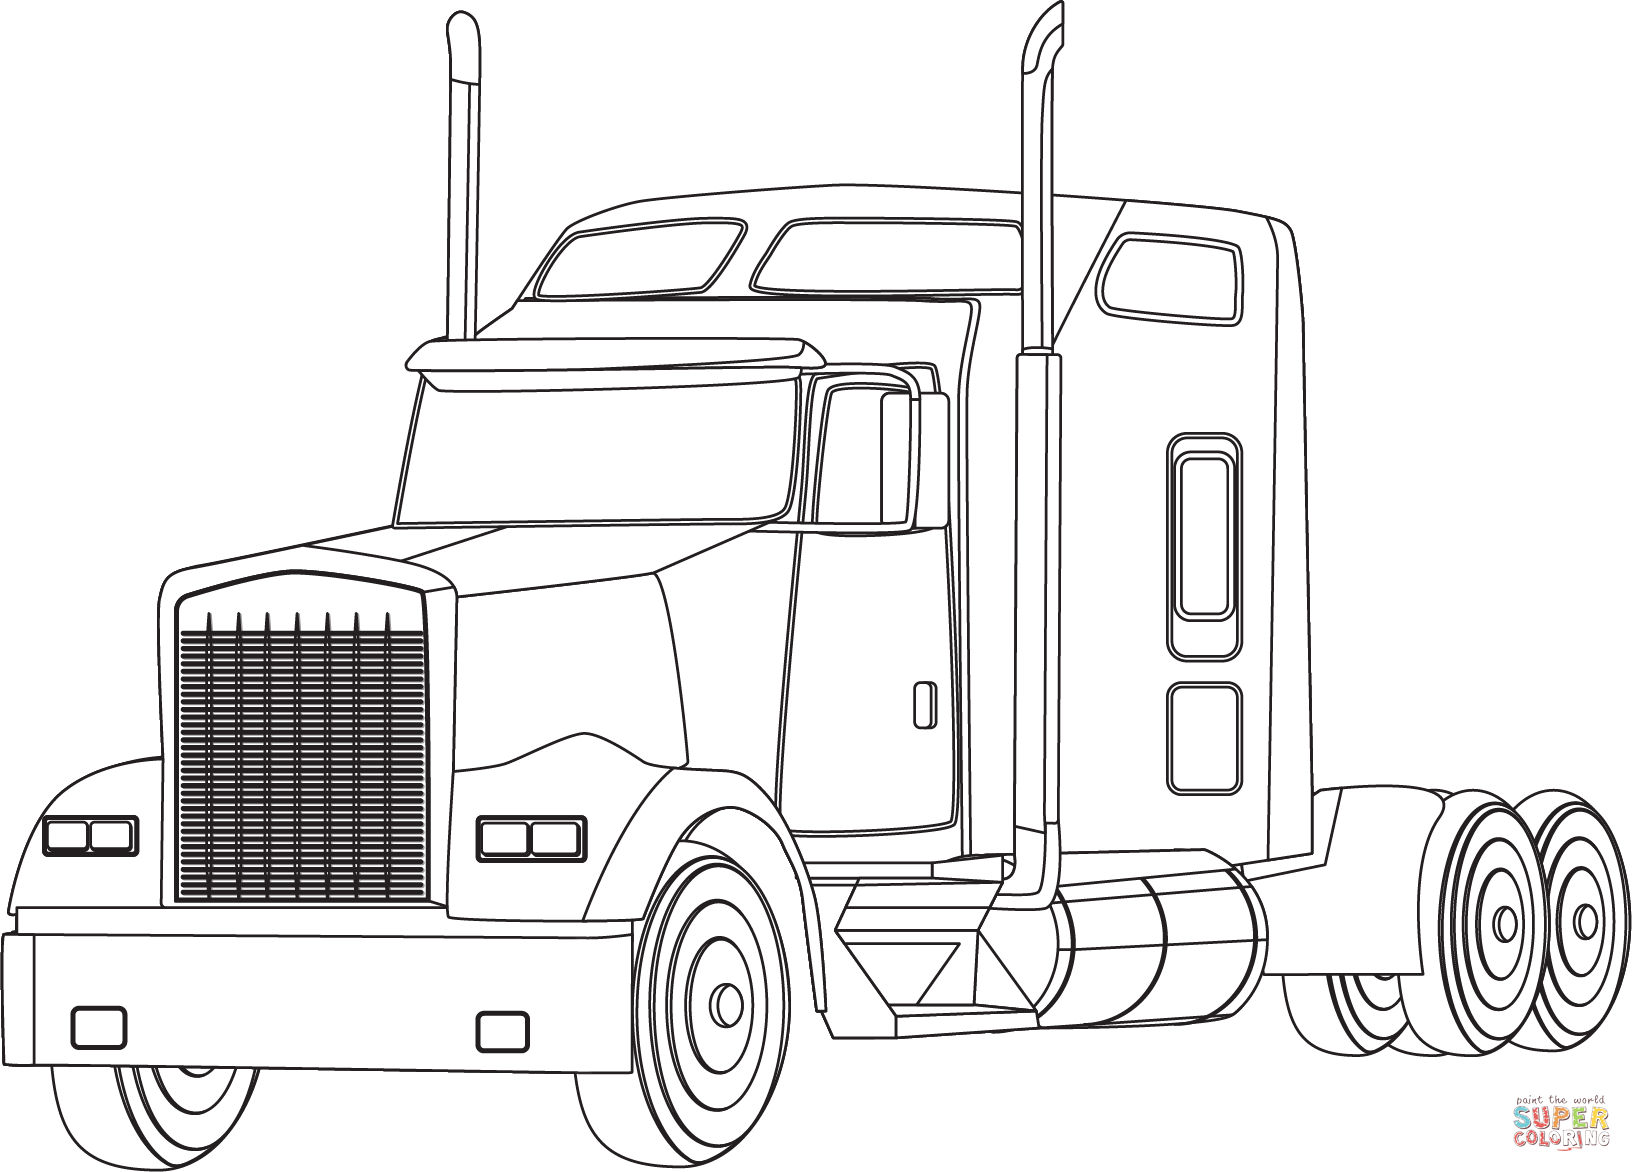 Semi truck coloring page free printable coloring pages